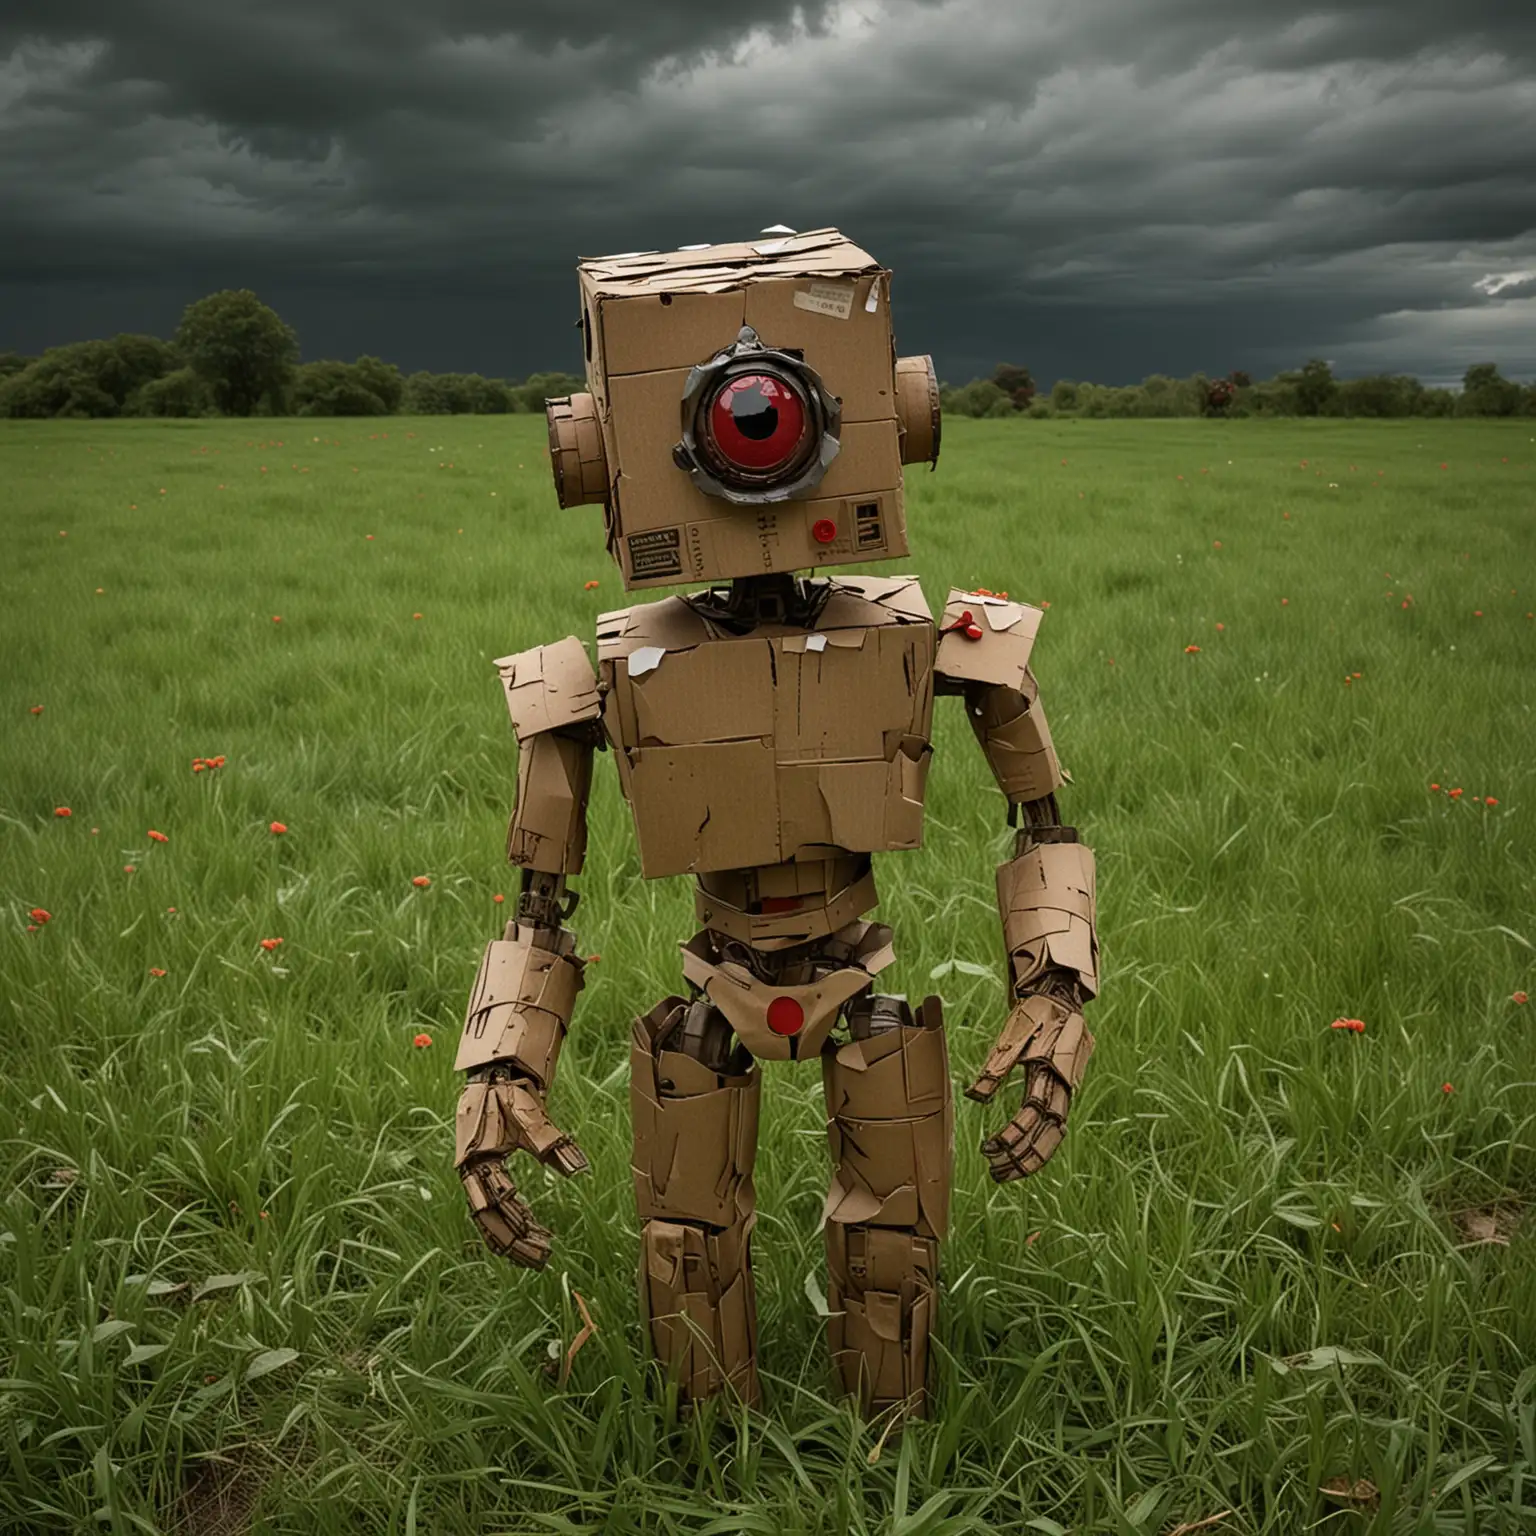 Rusted Metal Robot Guardian Standing Amidst Overcast Landscape